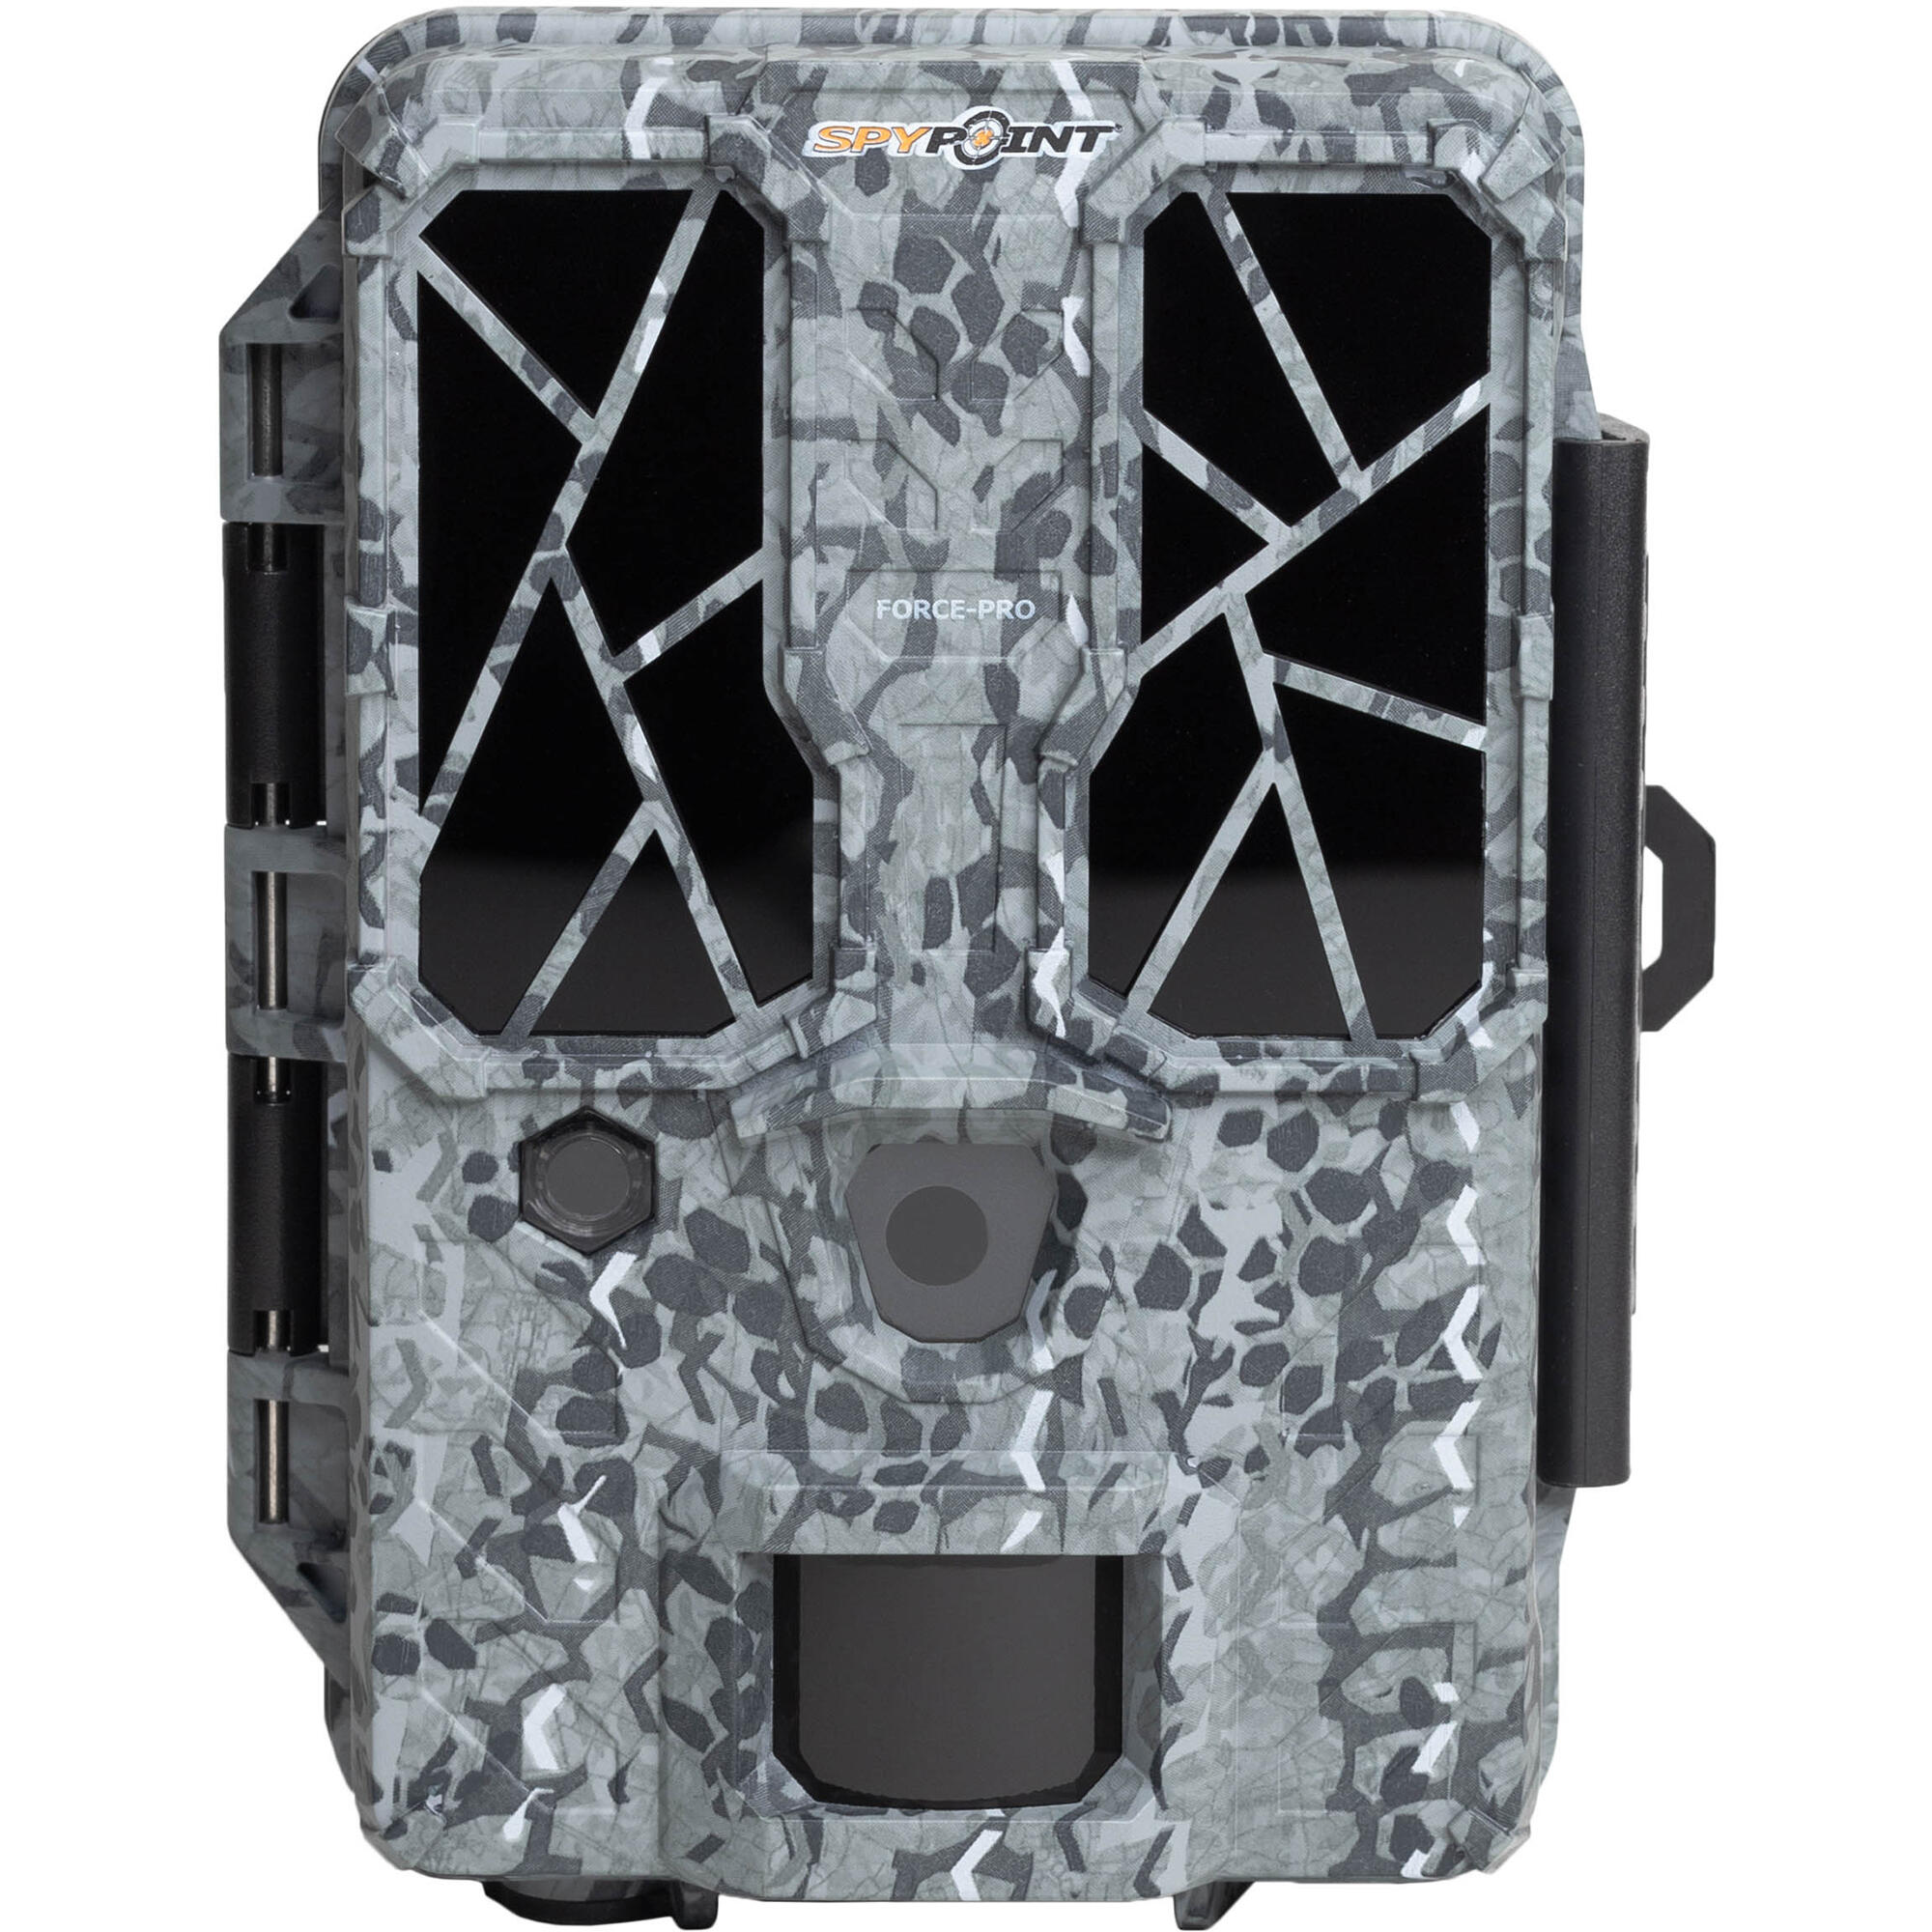 SPYPOINT Hunting Camera / Photo Trap SPYPOINT FORCE PRO